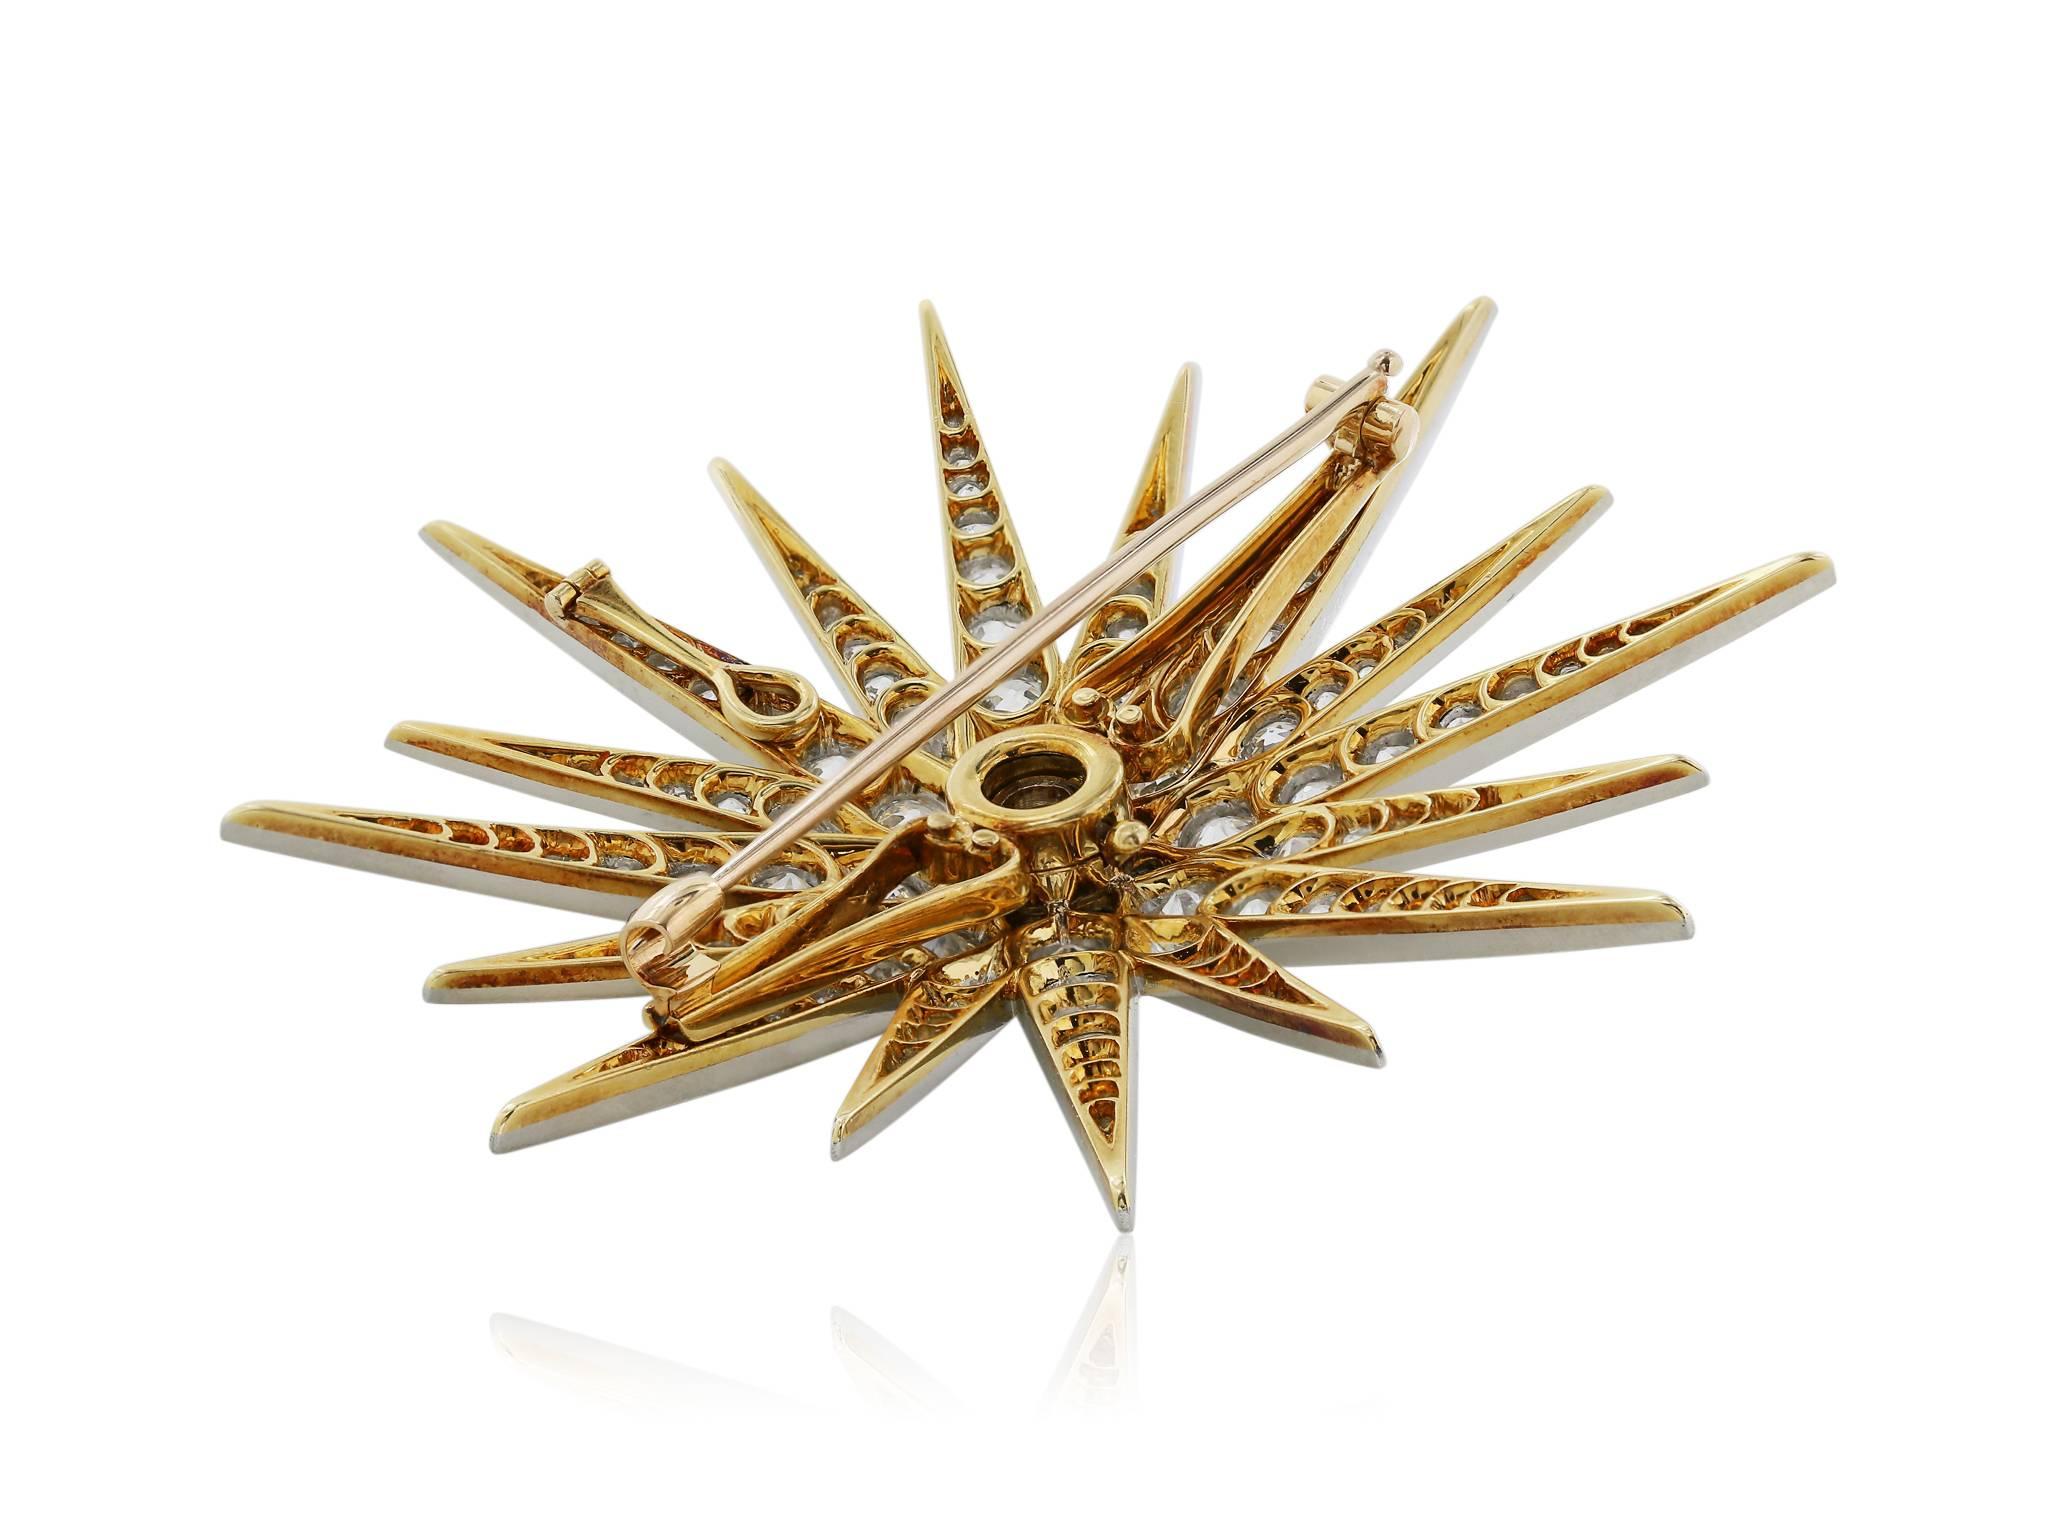 Edwardian platinum and 18 karat yellow gold star burst pin/brooch with approximately 10 carats of Old European cut diamonds, including a 1.10 carat diamond in the center, finished with a bail and can be worn as a pendant.